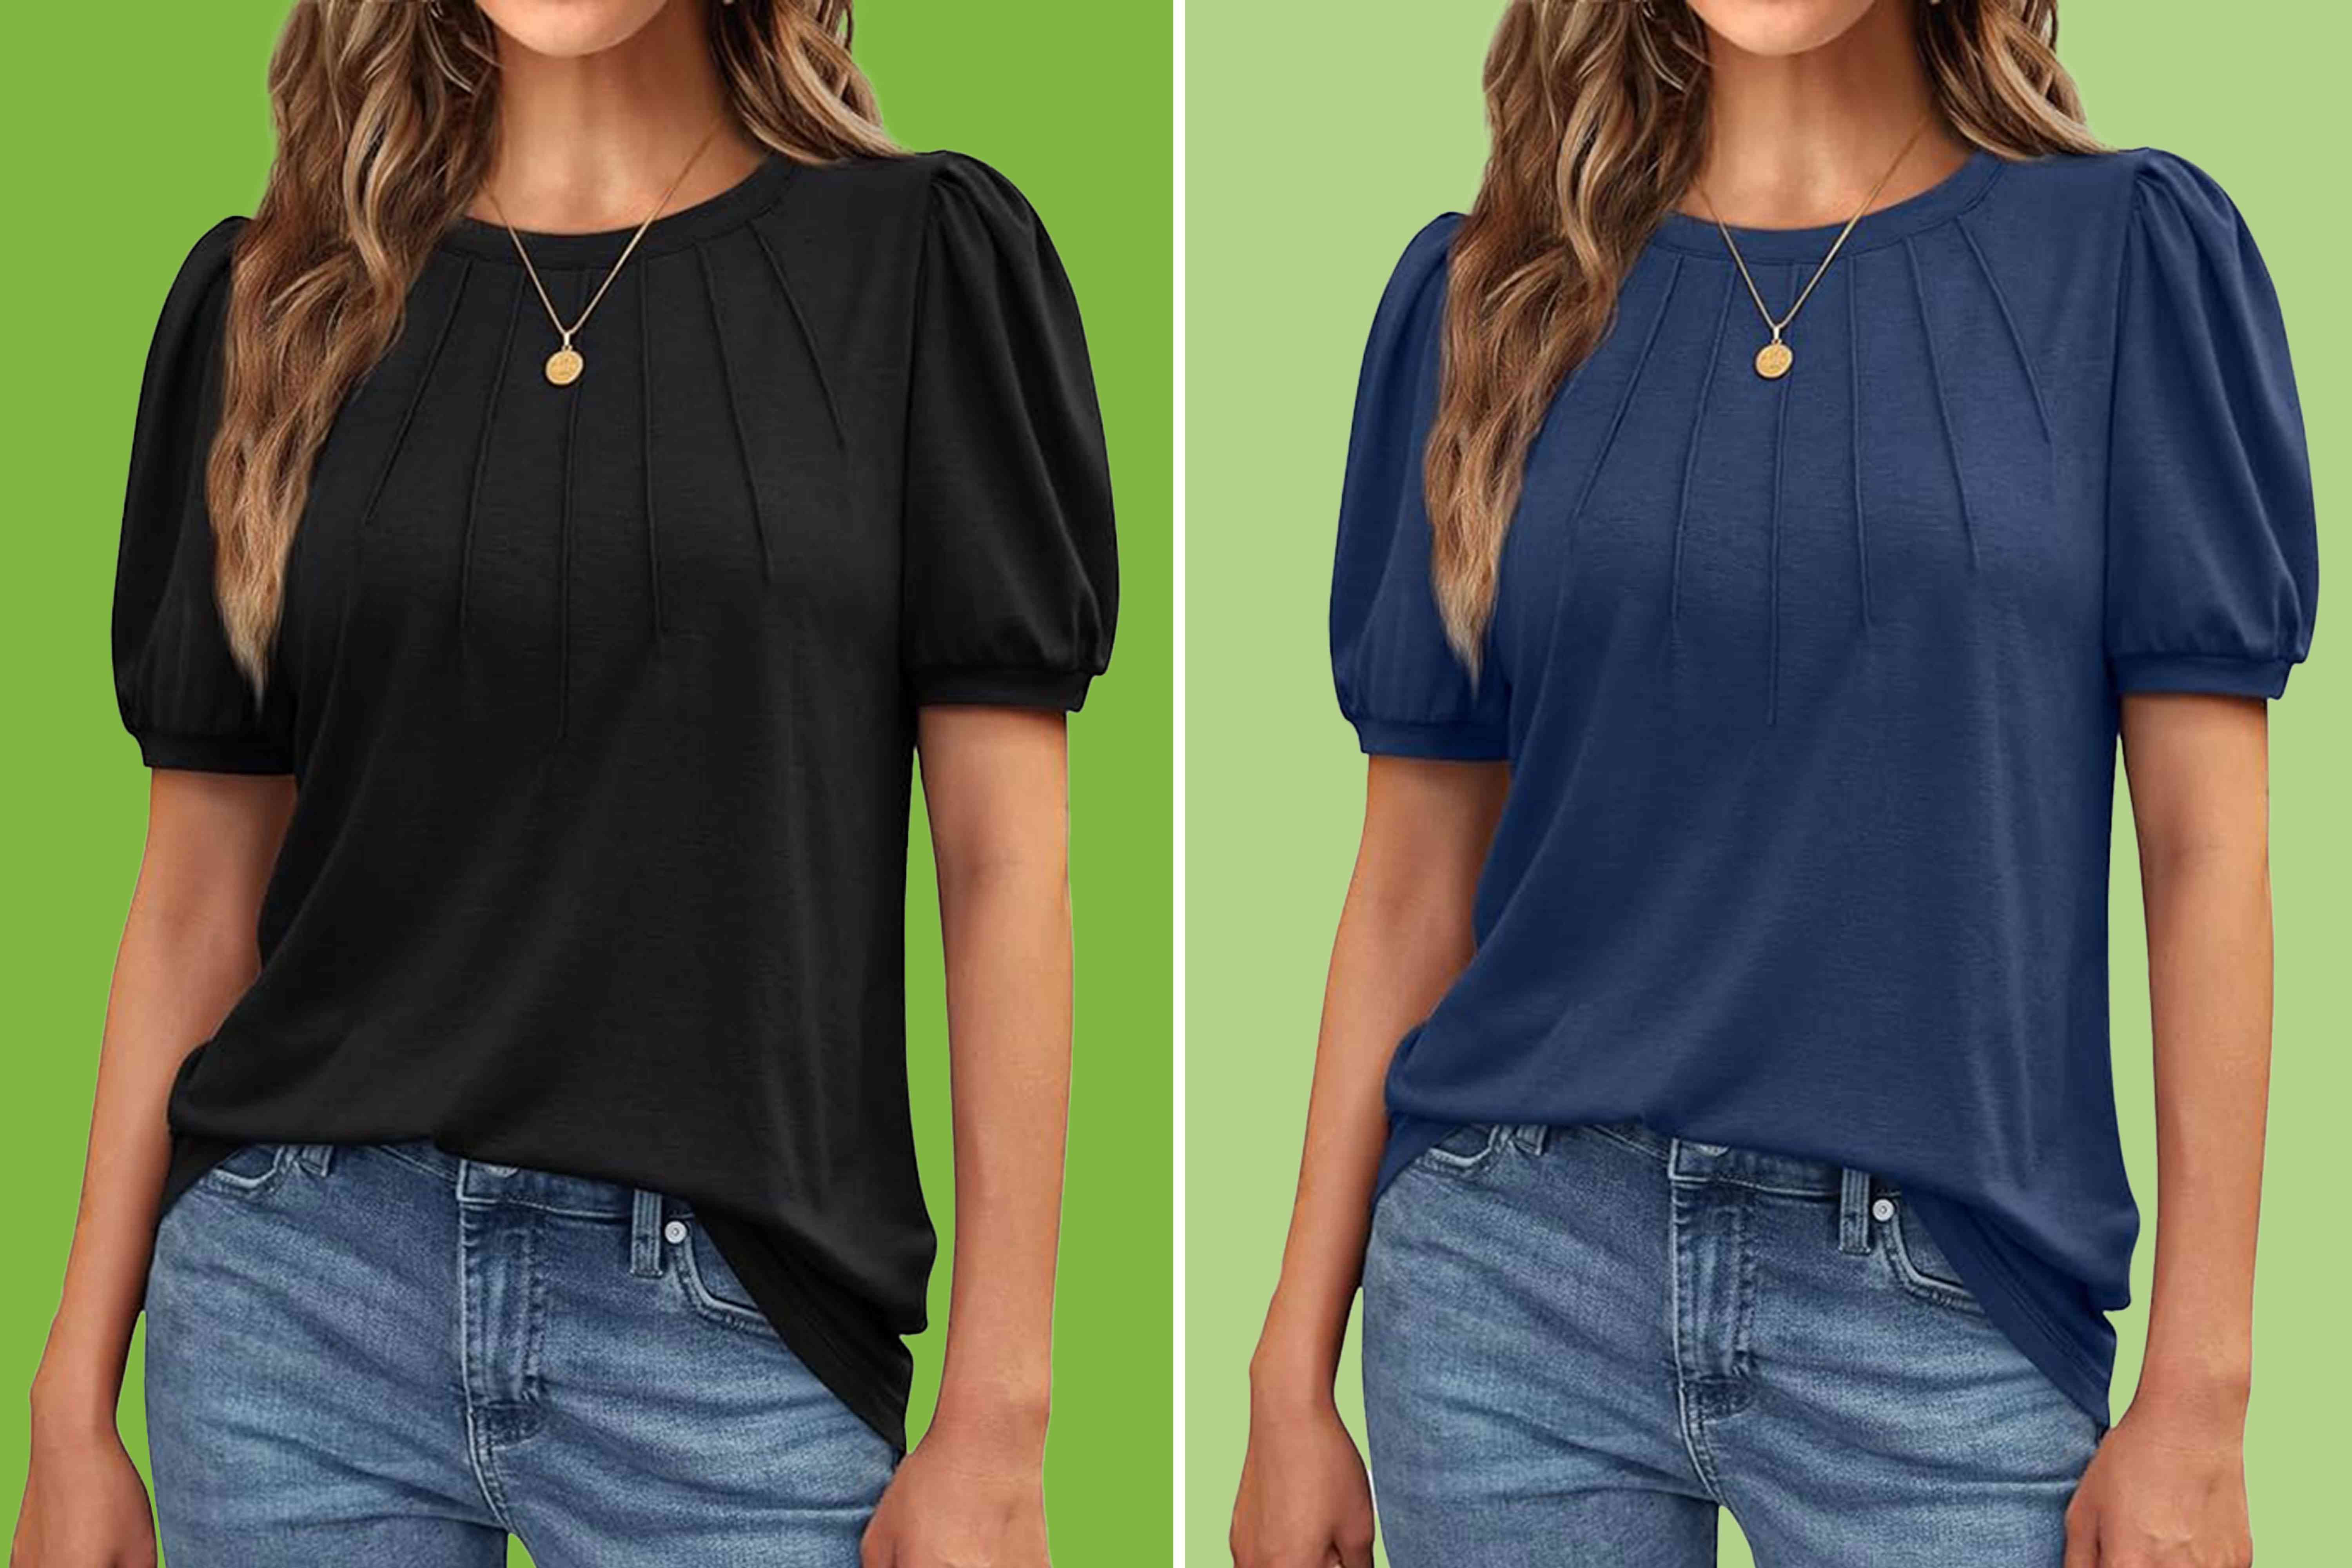 This $15 Summer Blouse Has a Cute Detail That Reese Witherspoon and Joanna Gaines Have Worn This Summer